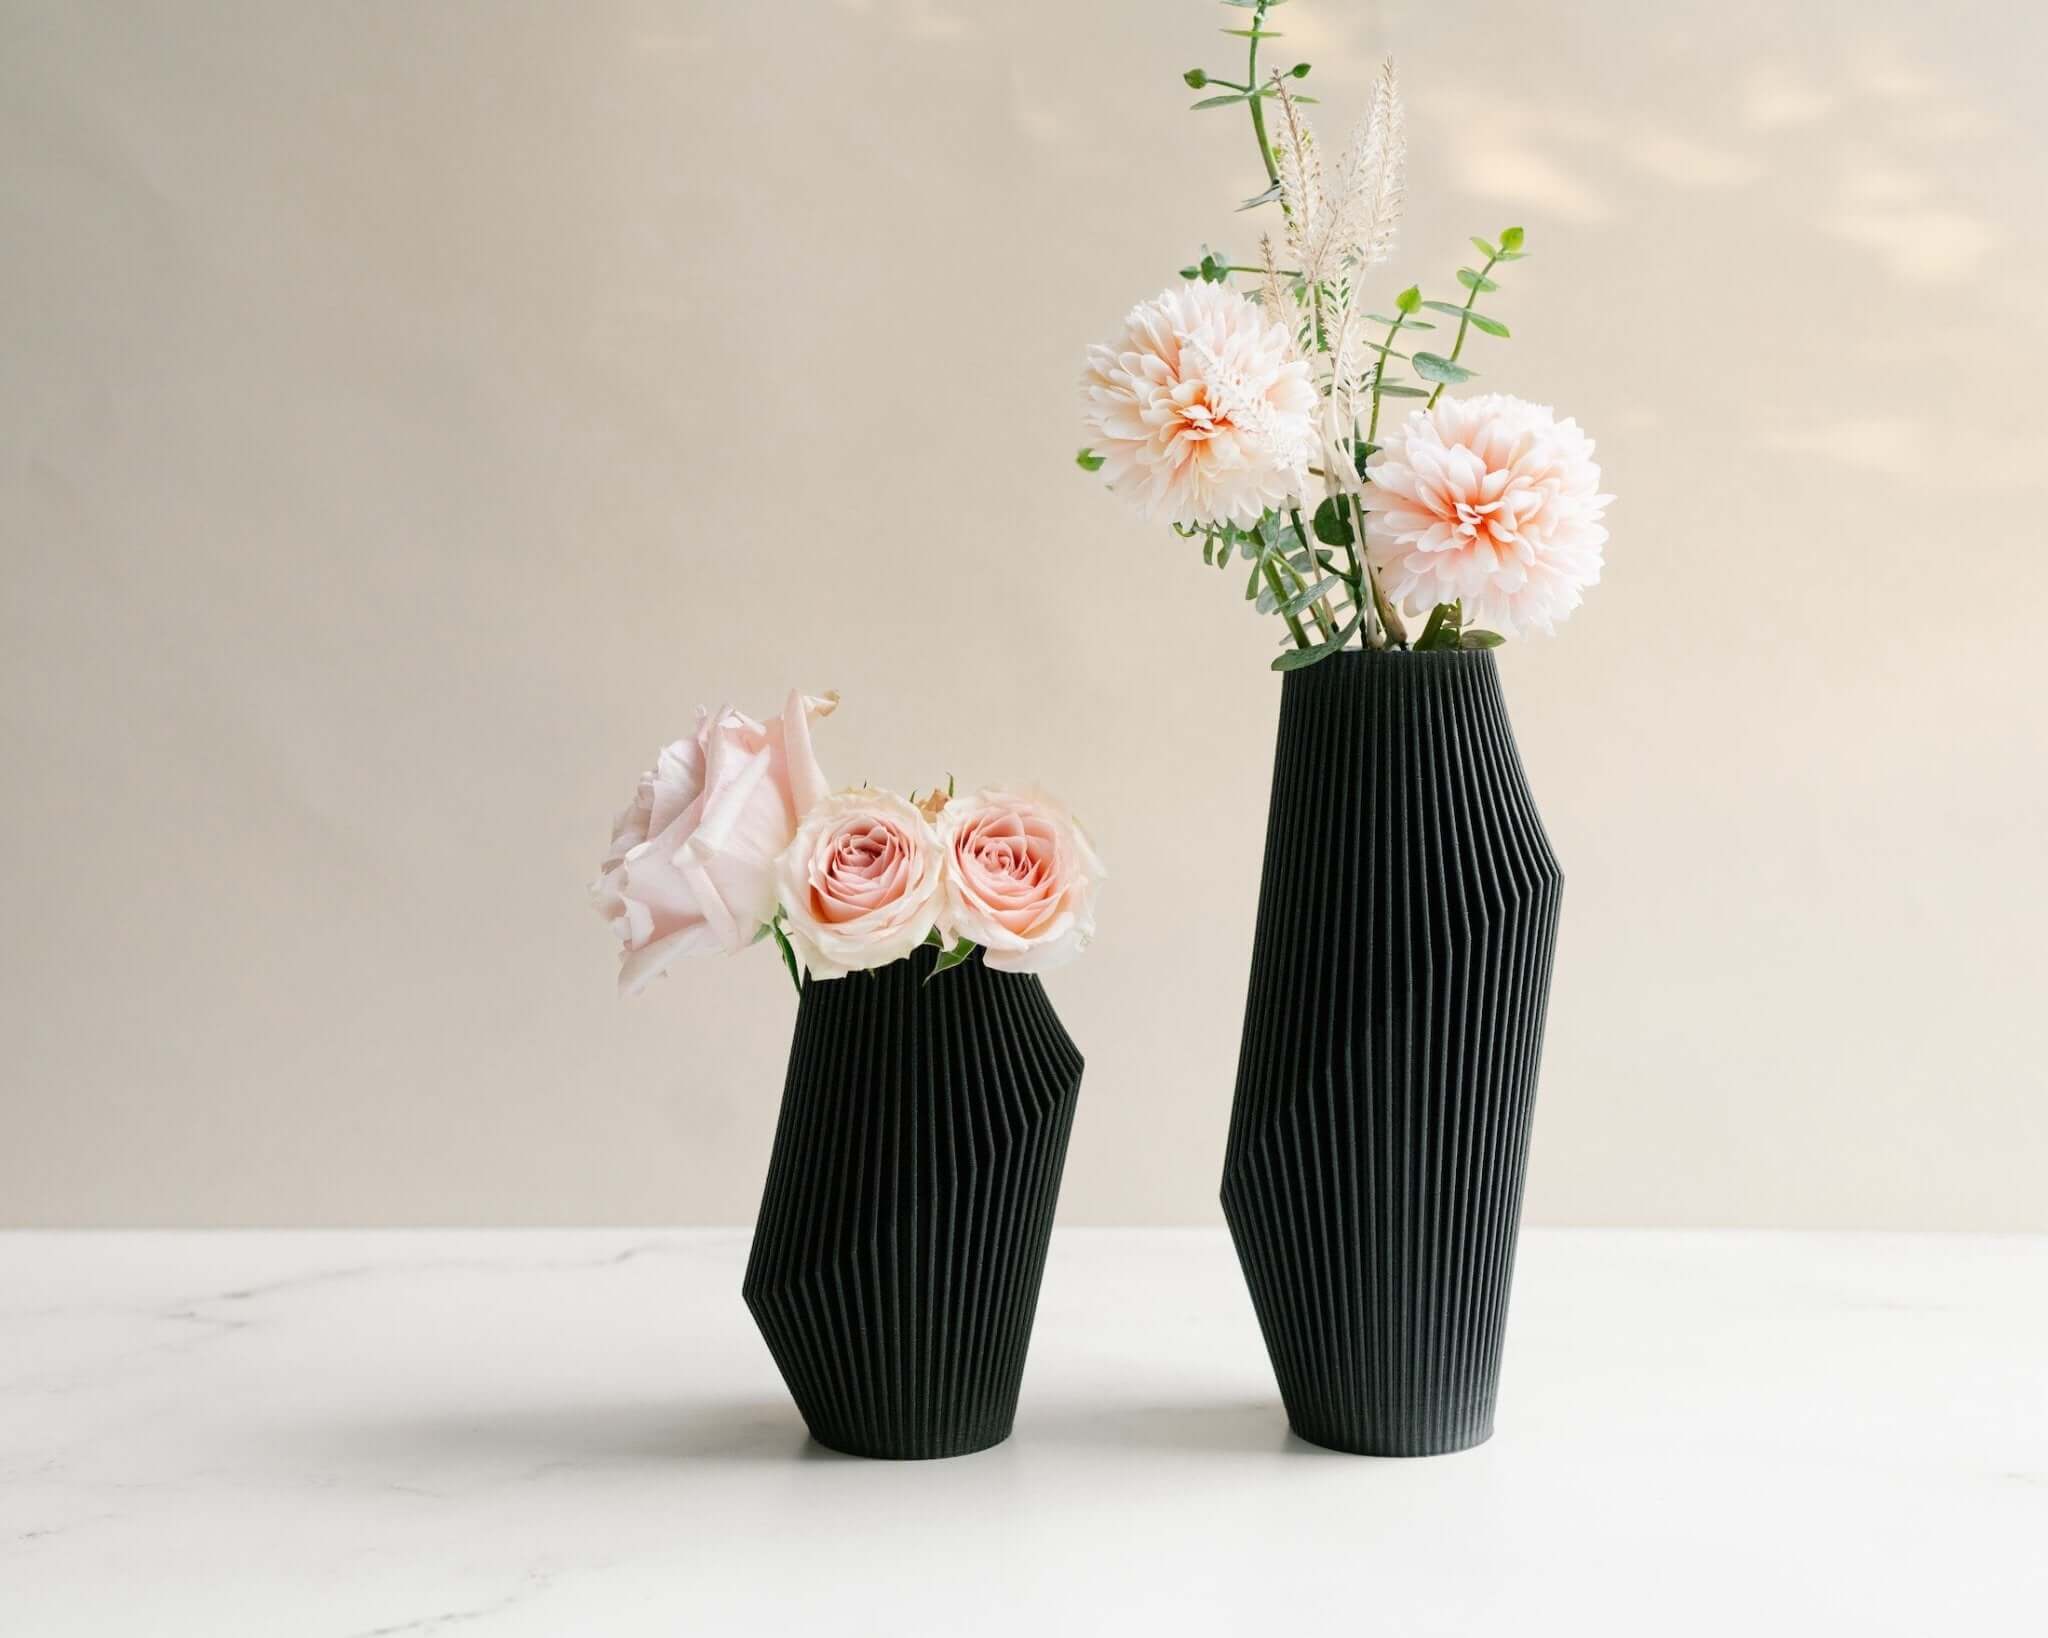 Two NOVA modern vases with flowers.